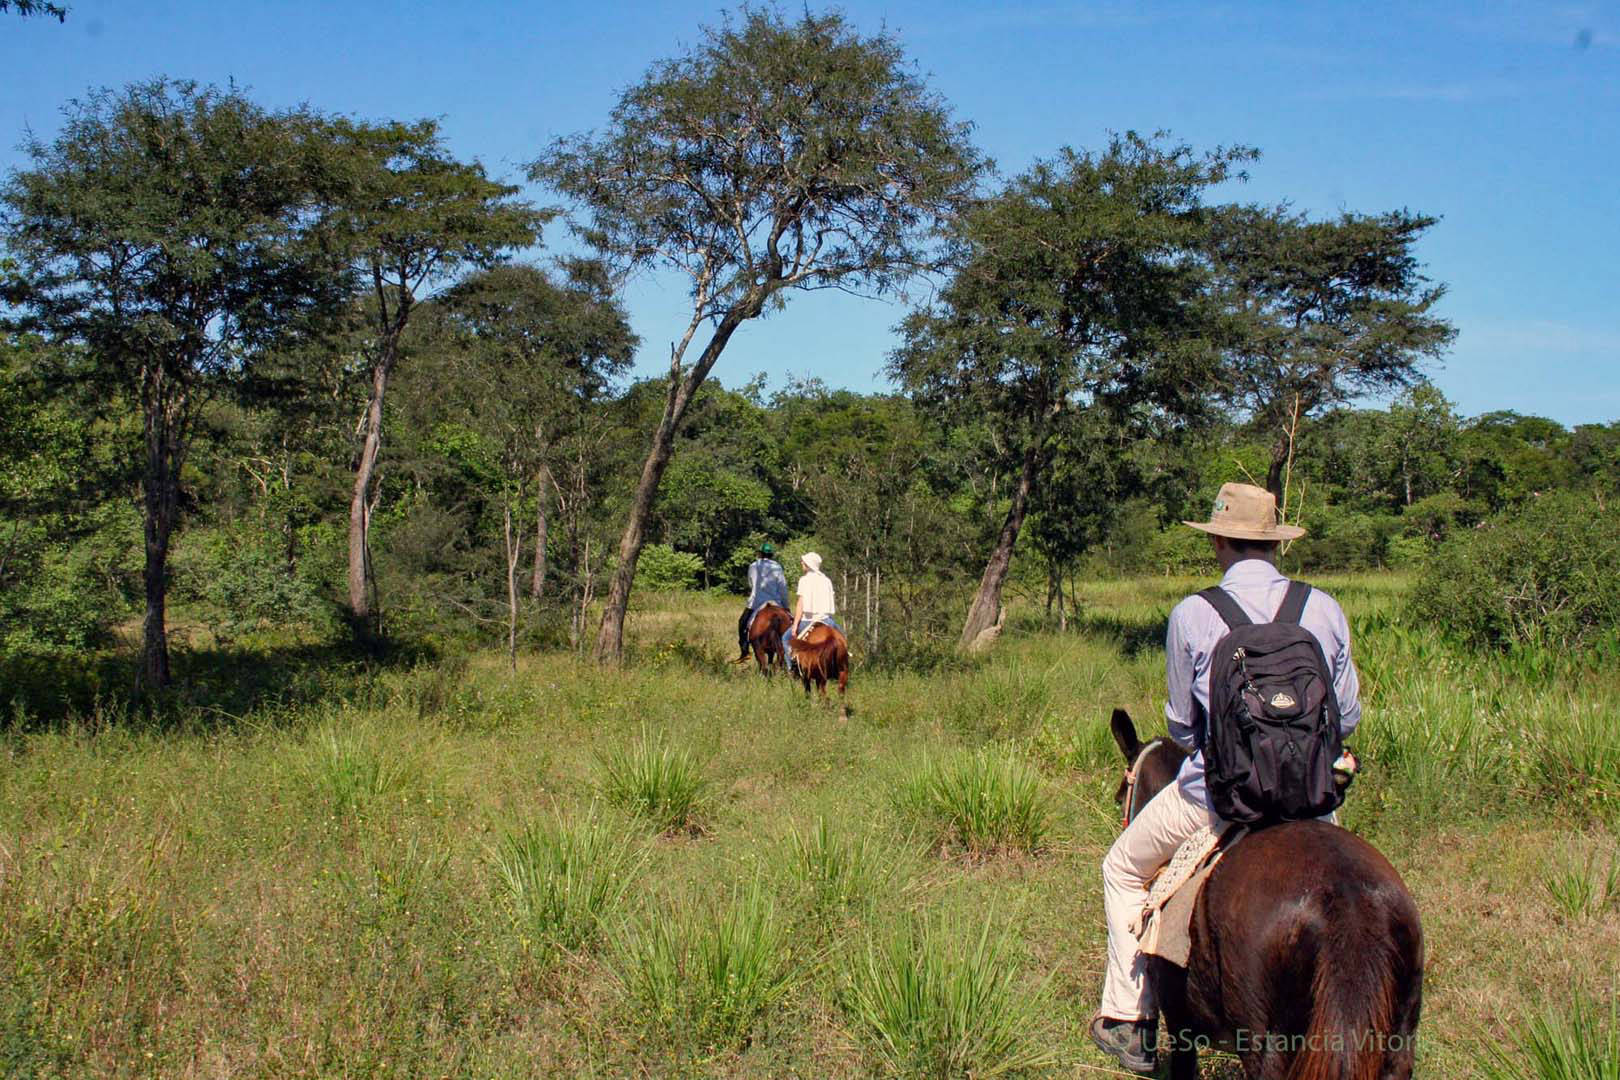 Excursions on horseback, discovery tours